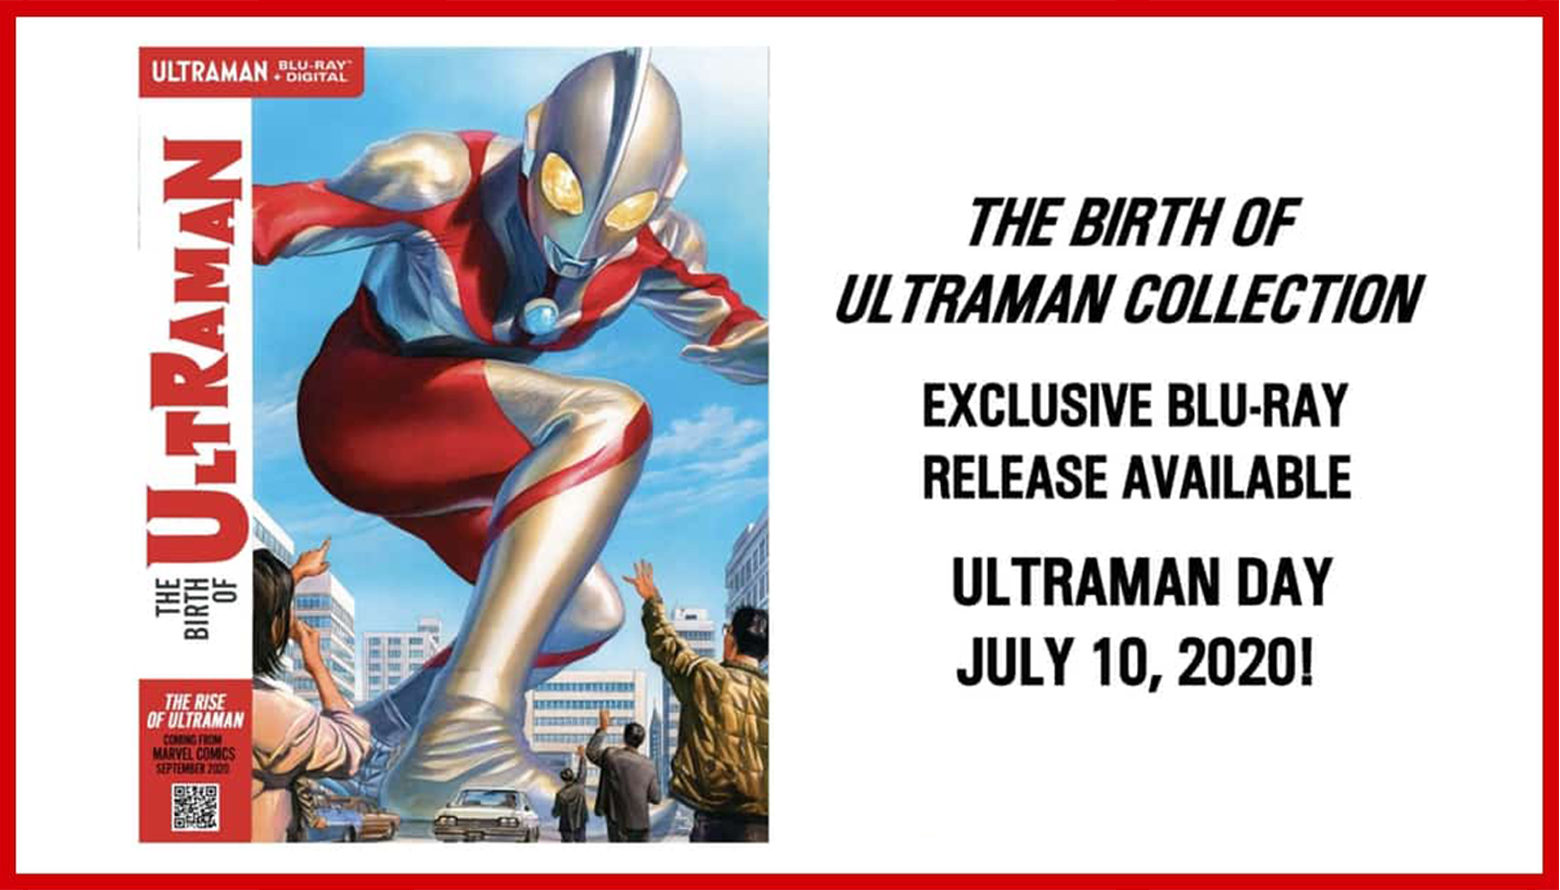 THE BIRTH OF ULTRAMAN COLLECTION EXCLUSIVE BLU-RAY RELEASE  FOR ULTRAMAN DAY JULY 10, 2020!